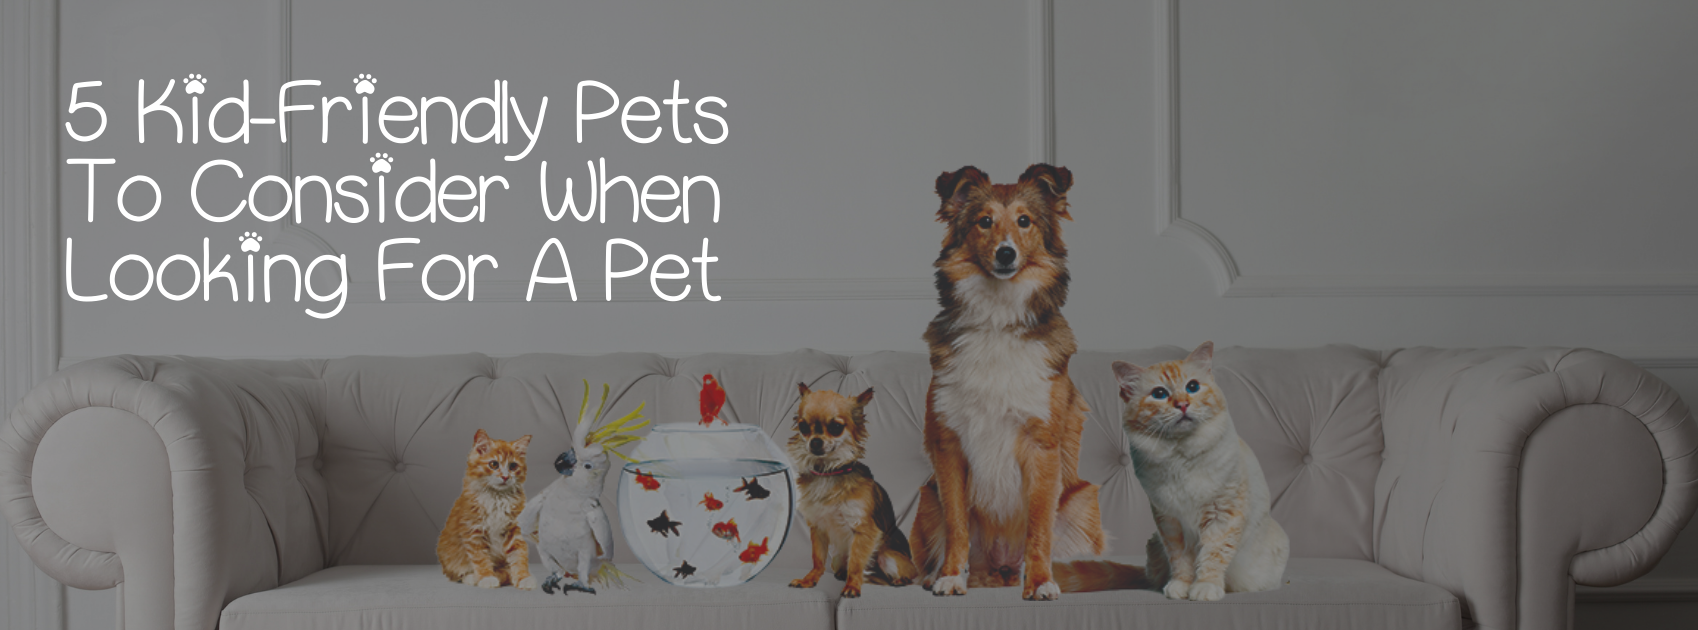 5 KID-FRIENDLY PETS TO CONSIDER WHEN LOOKING FOR A PET